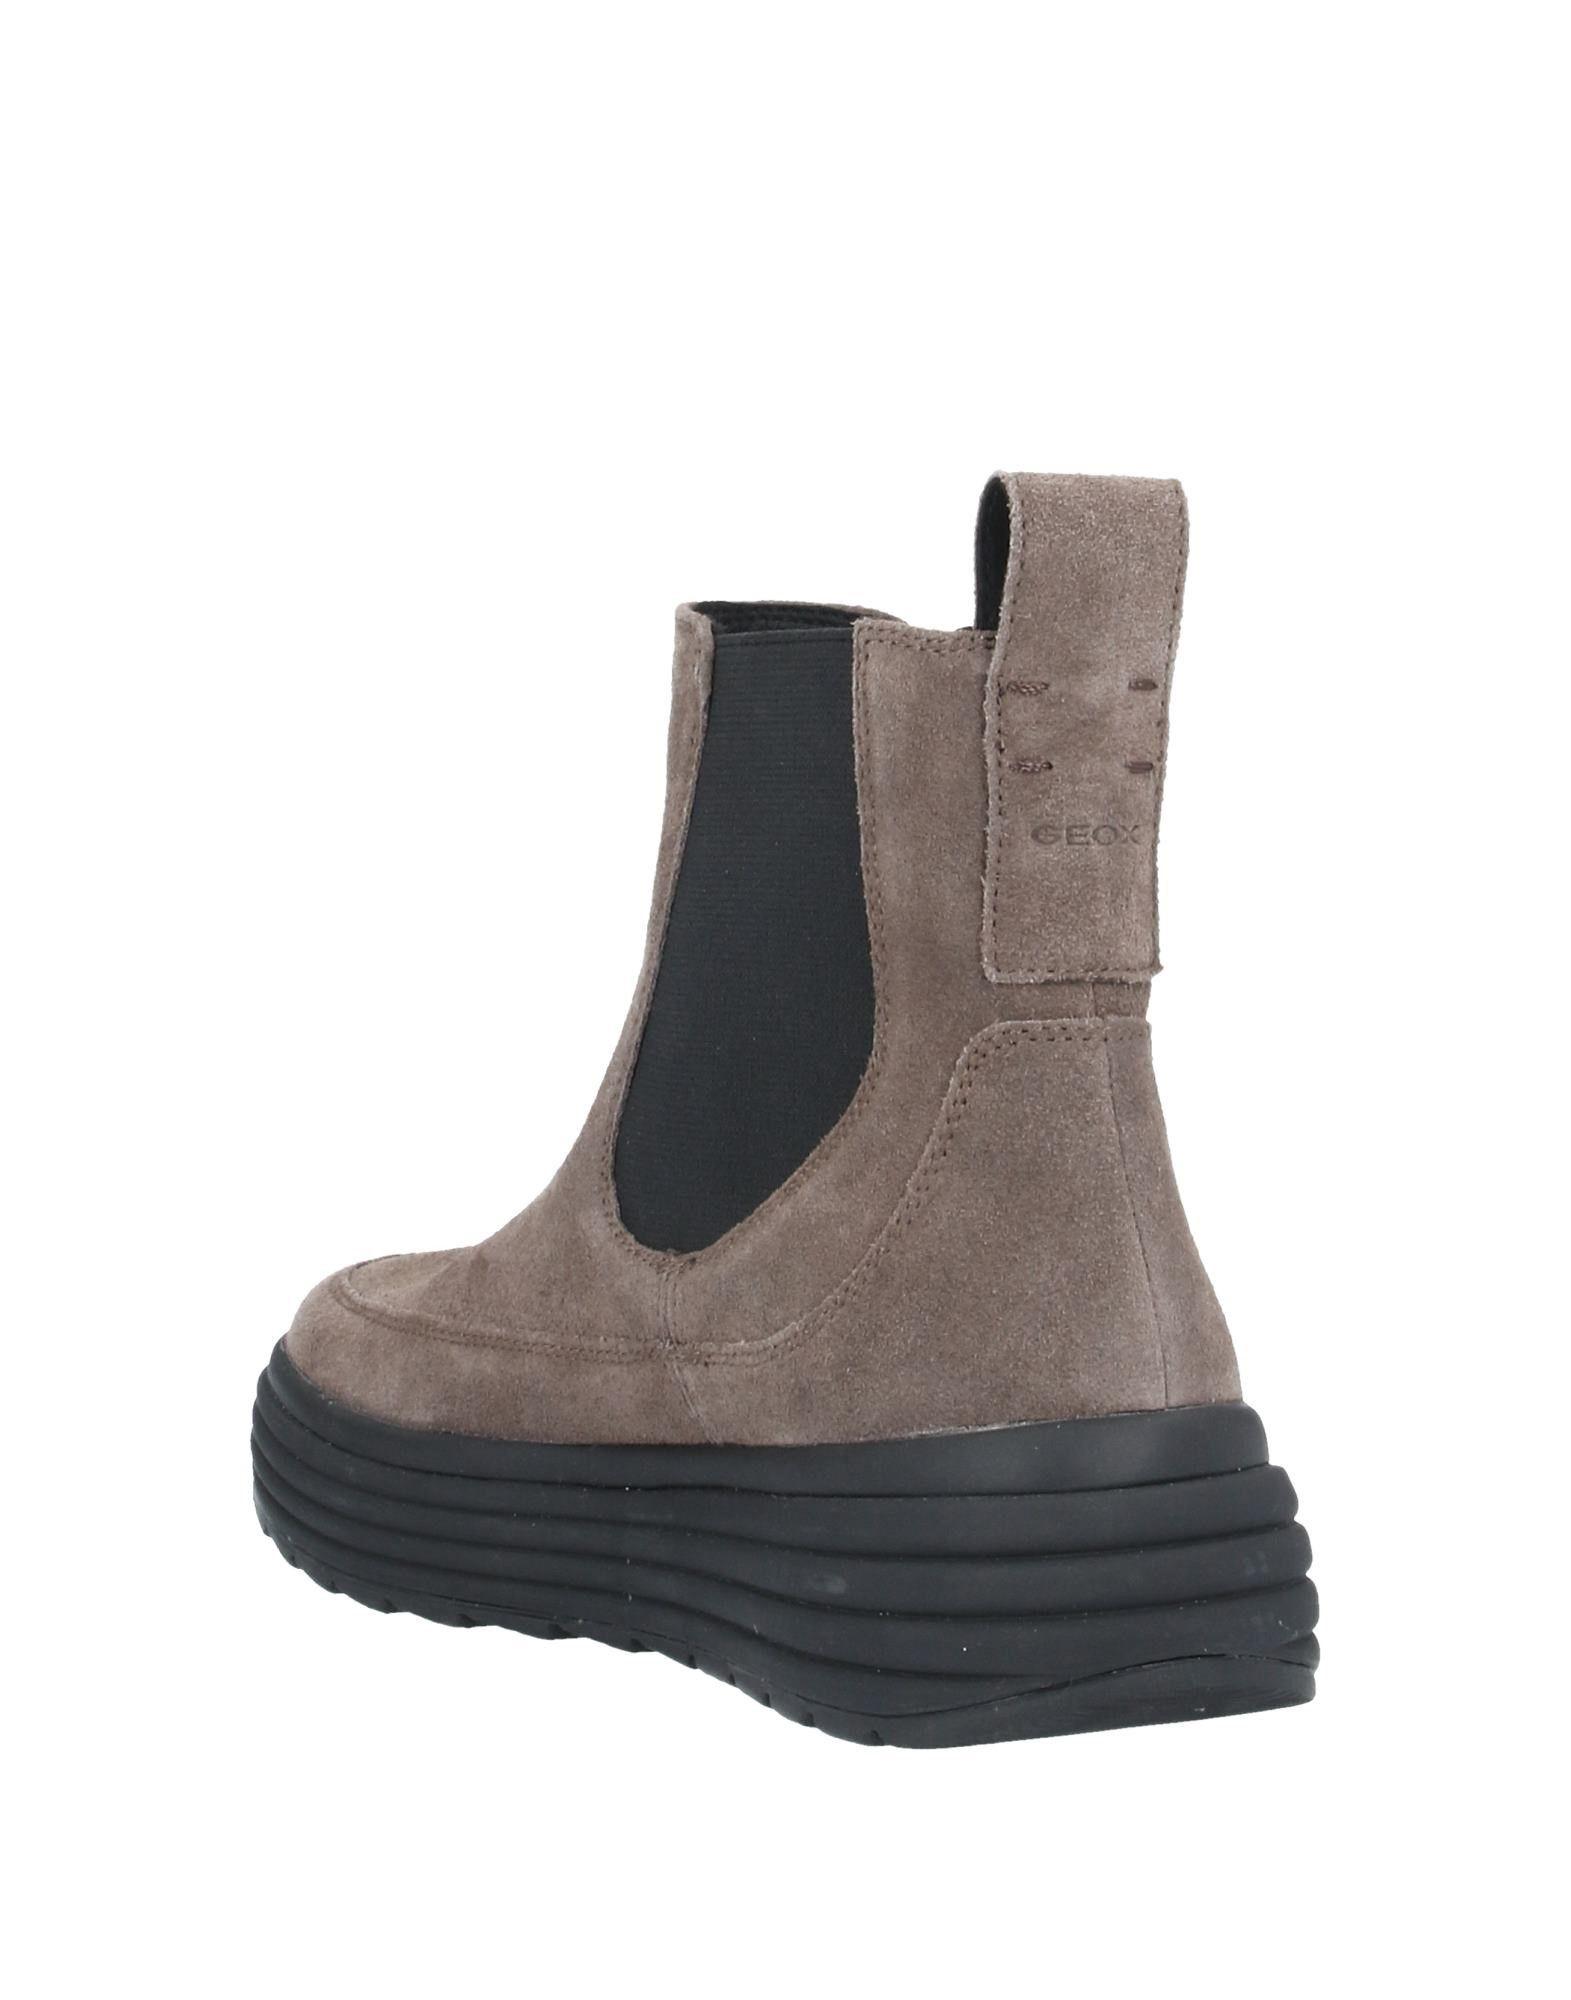 Geox Ankle Boots in Khaki (Brown) - Lyst